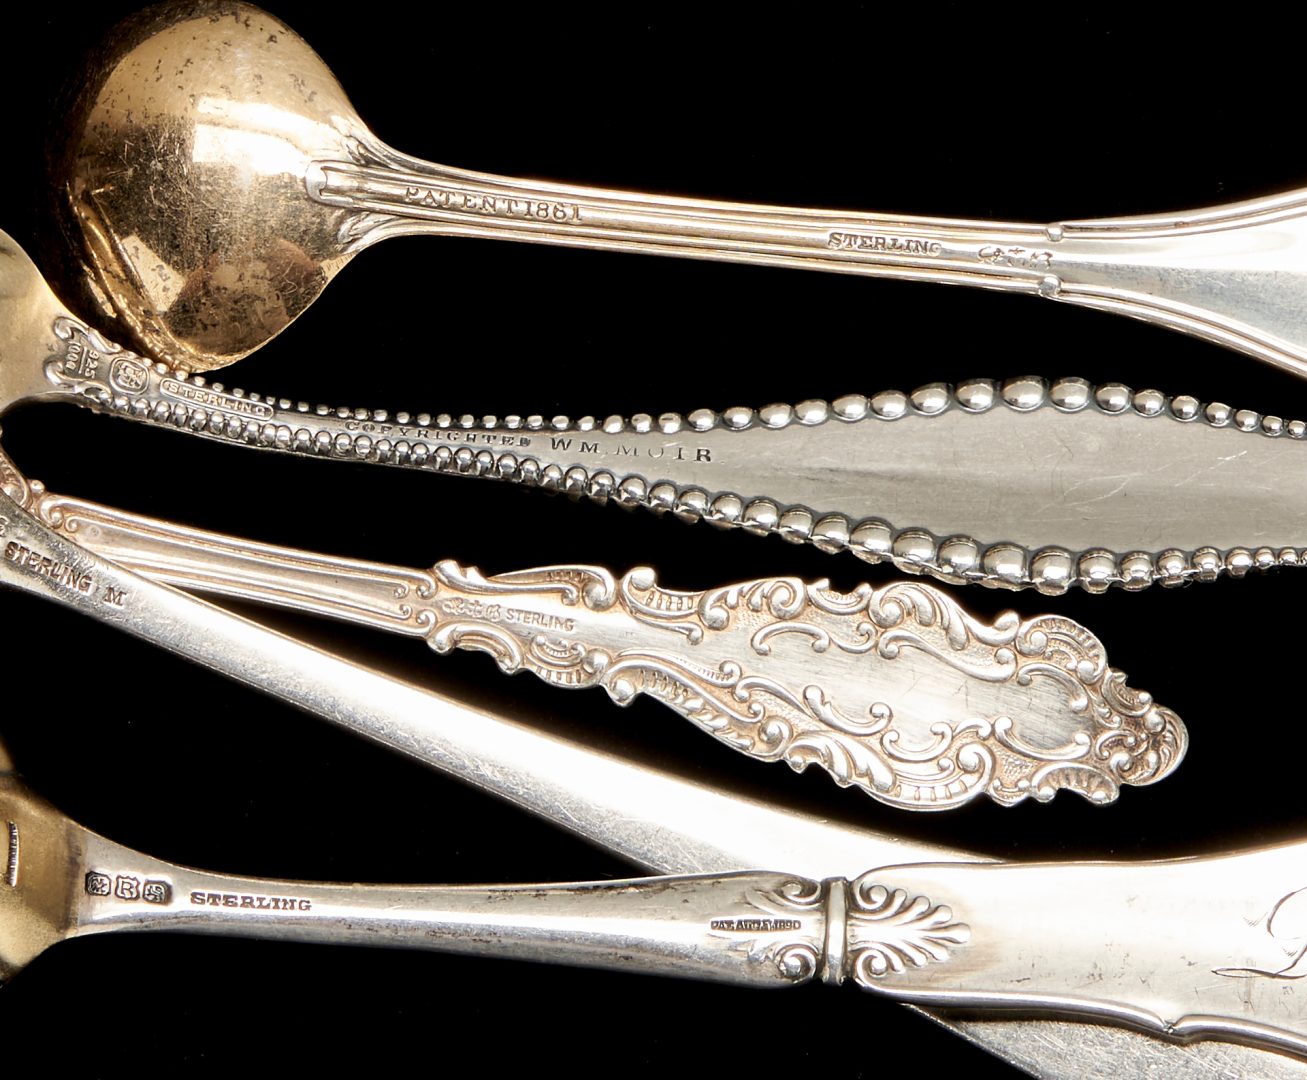 Lot 51: 46 Pcs. Assorted Sterling Flatware, incl. Reed & Barton